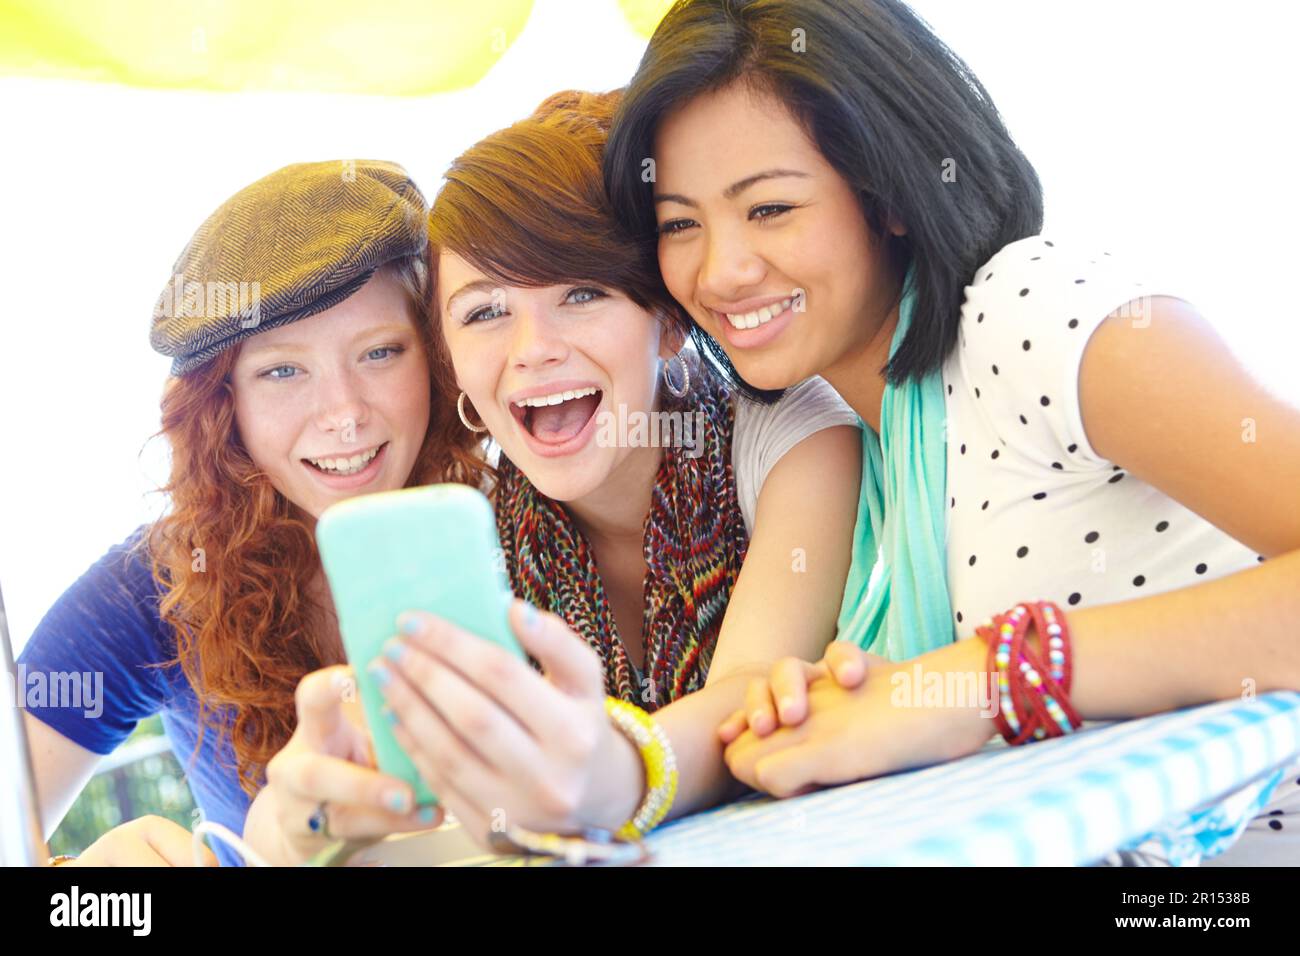 What a funny picture. A group of adolescent girls laughing as they look at something on a smartphone screen. Stock Photo